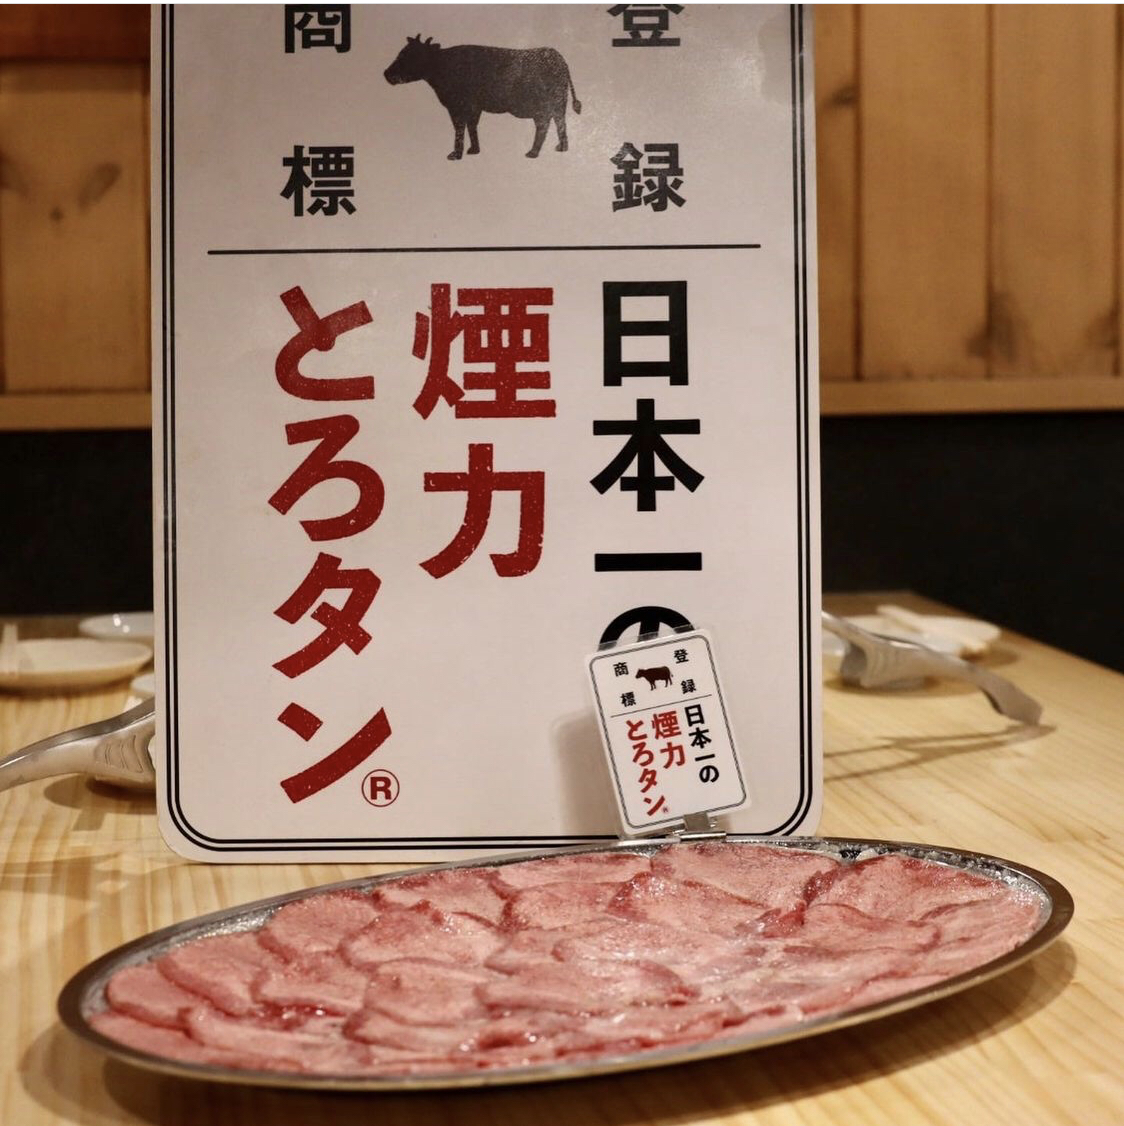 You can enjoy good quality meat♪